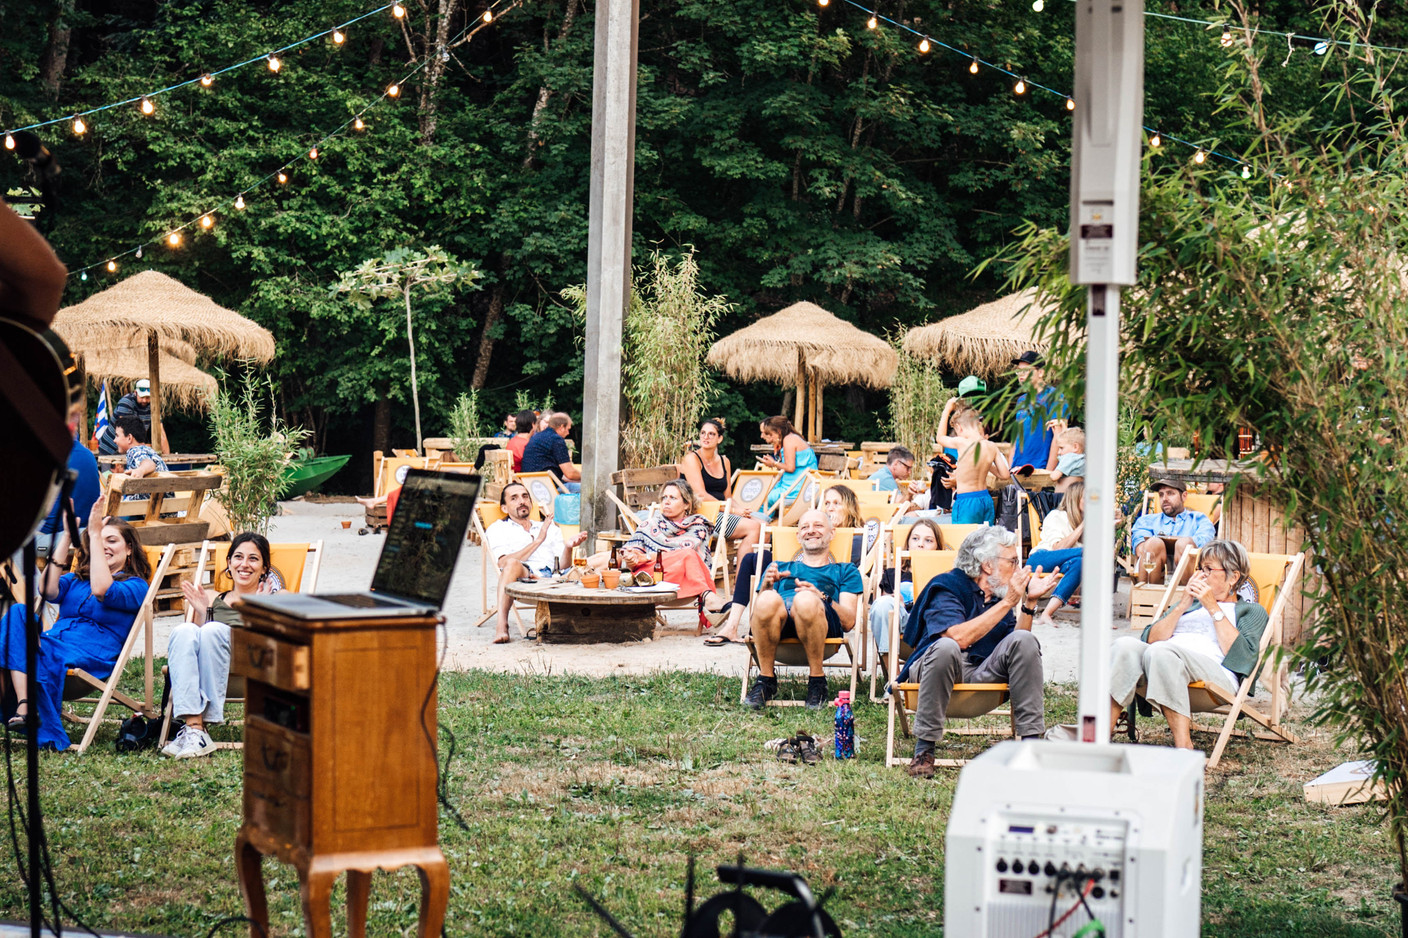 Concerts are scheduled every weekend.   Photo: Opyos Beverages